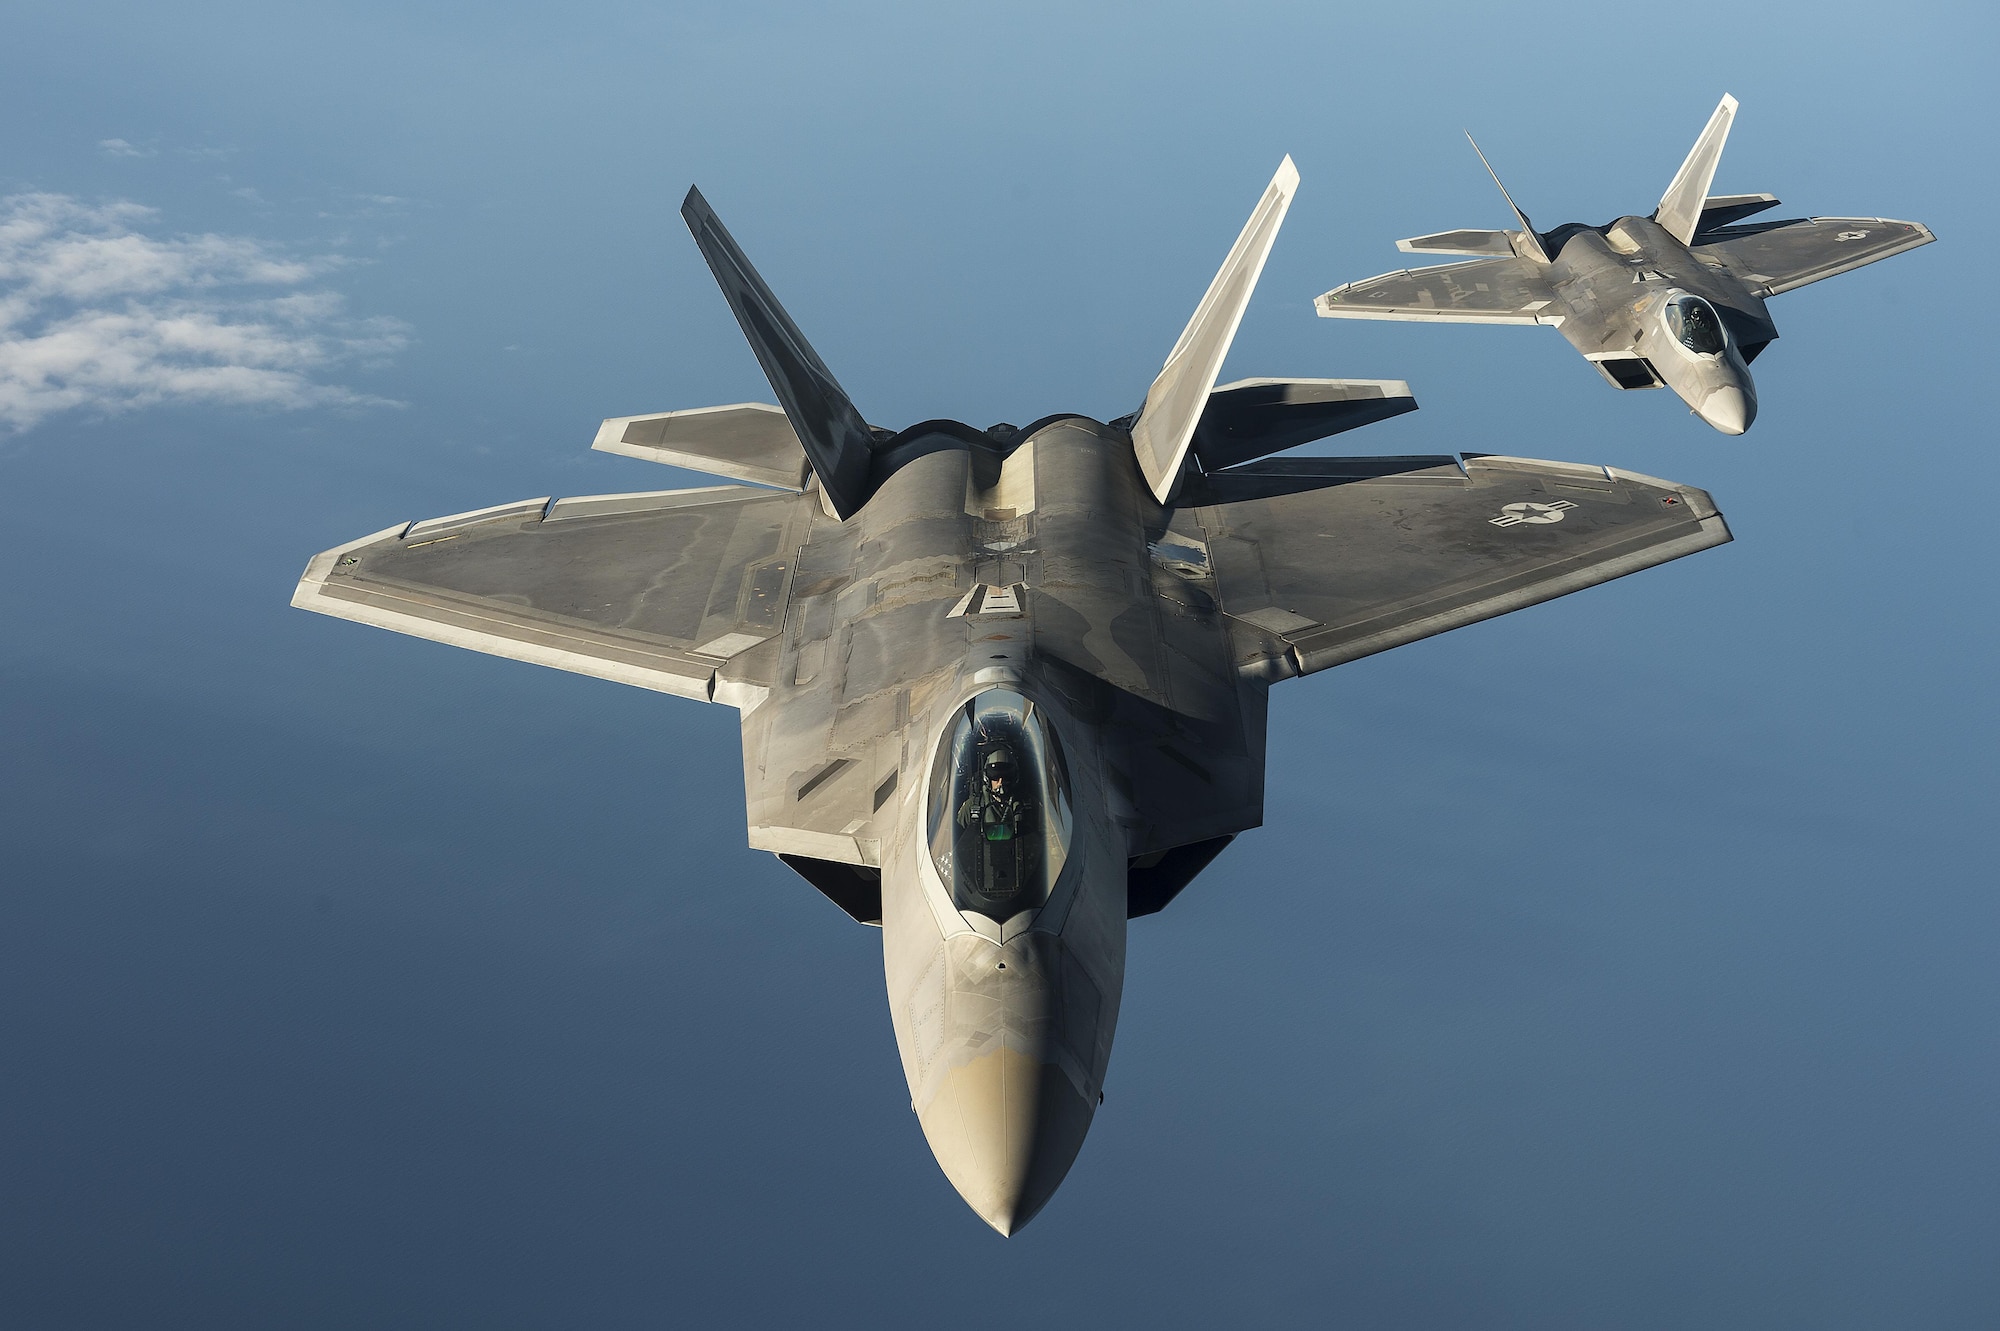 Two F-22 Raptors from the 95th Fighter Squadron at Tyndall Air Force Base, Fla., fly over the Baltic Sea on Sept. 4, 2015. Like the F-22 deployment last year, two F-22s deployed to Mihail Kogalniceanu Air Base, Romania. While in Europe, U.S. Air Force aircraft and Airmen will conduct air training with other Europe-based aircraft. (U.S. Air Force photo/Tech. Sgt. Jason Robertson)